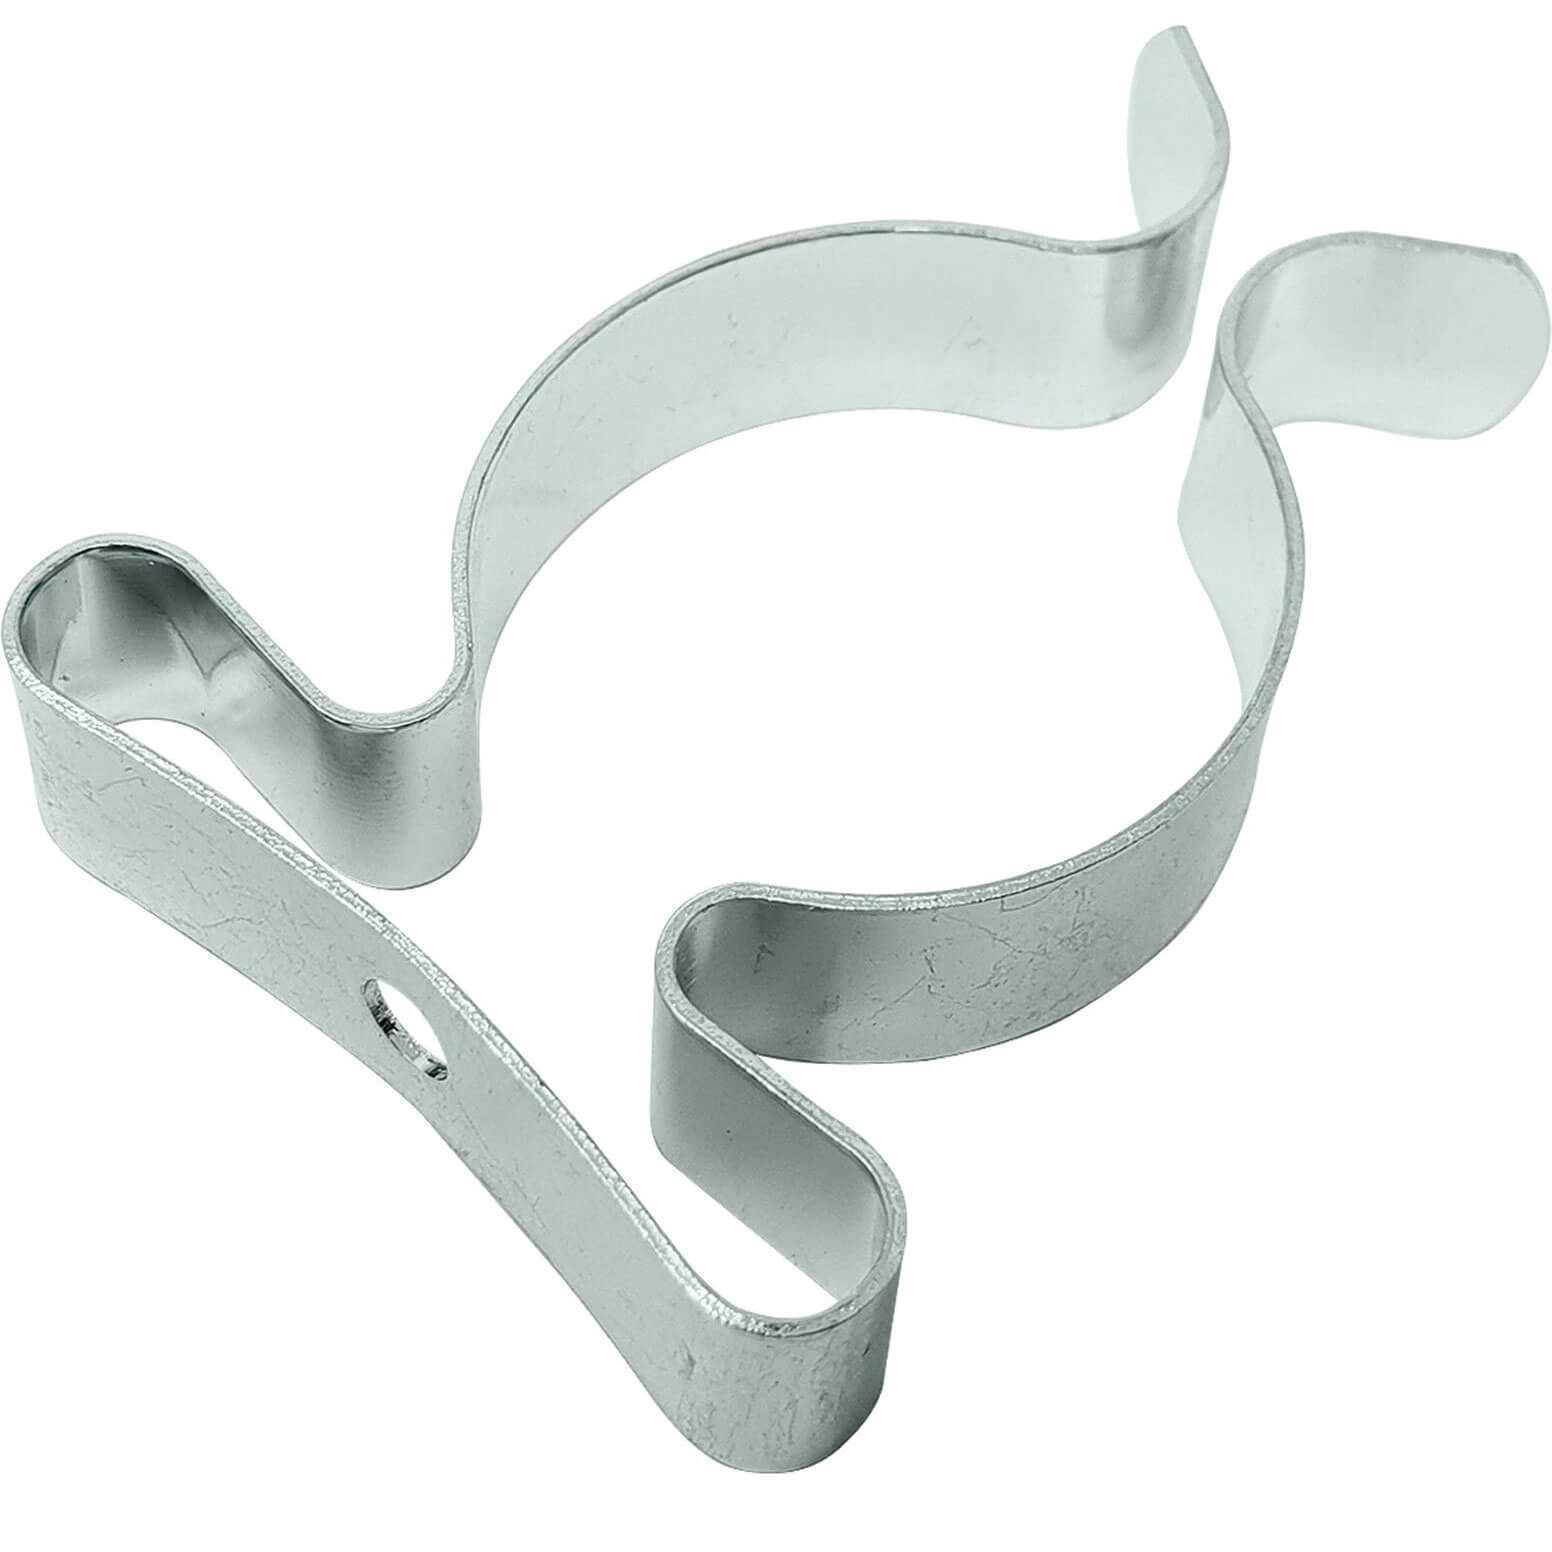 Image of Forgefix Zinc Plated Tool Clips 29mm Pack of 25